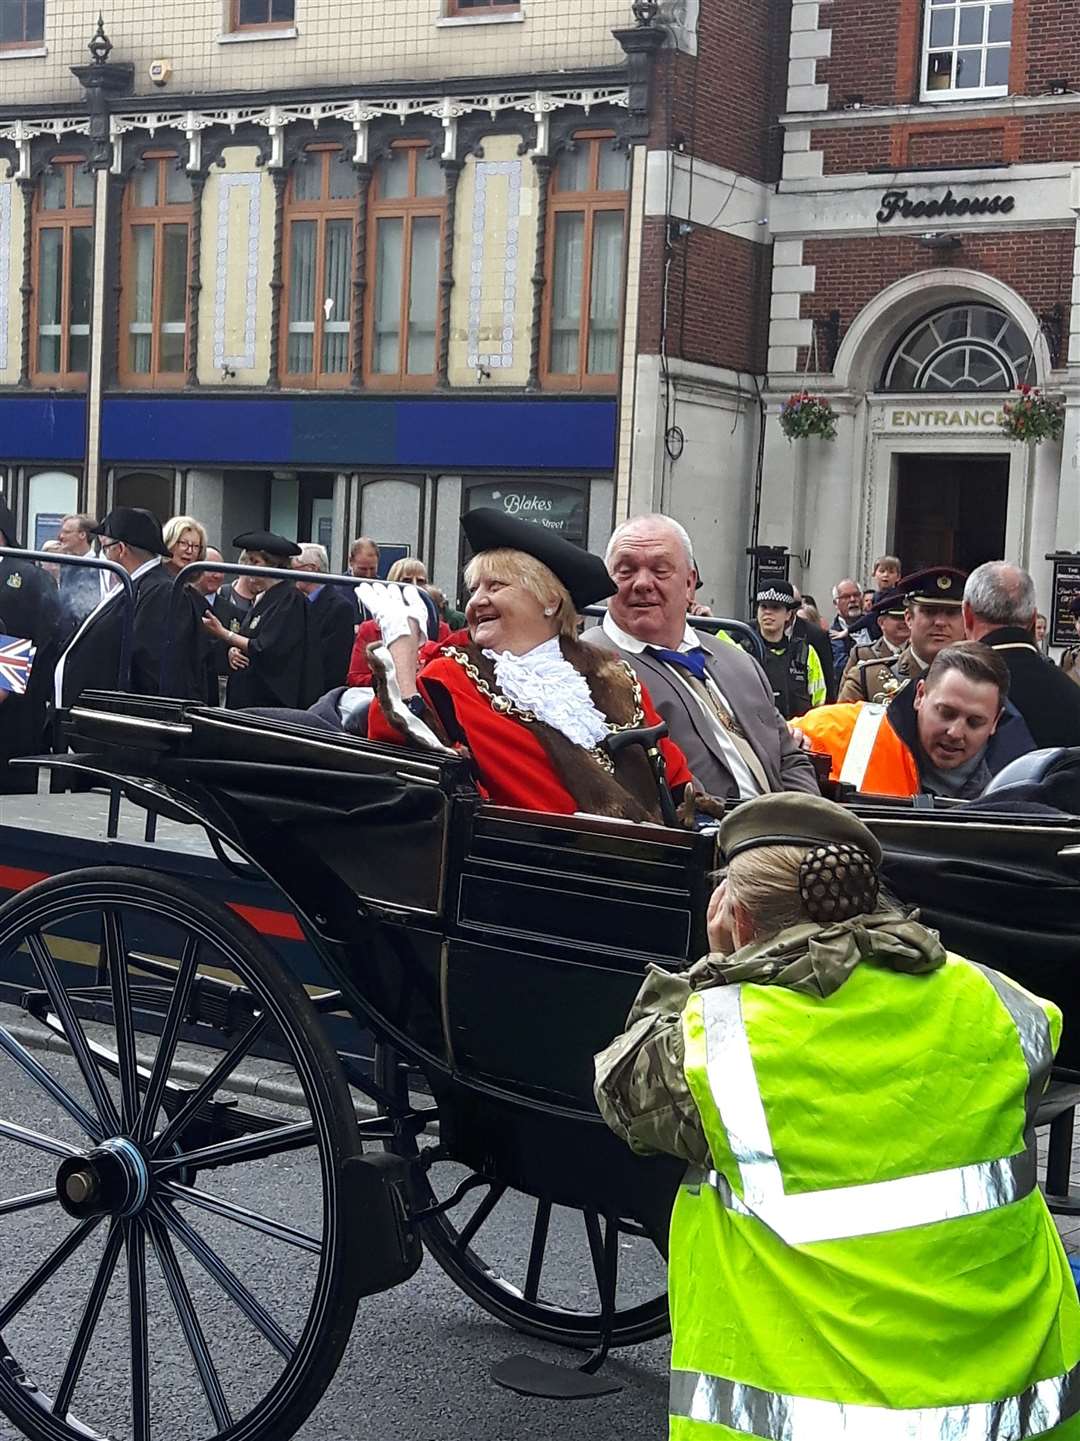 Riding in style -The Mayor and her husband